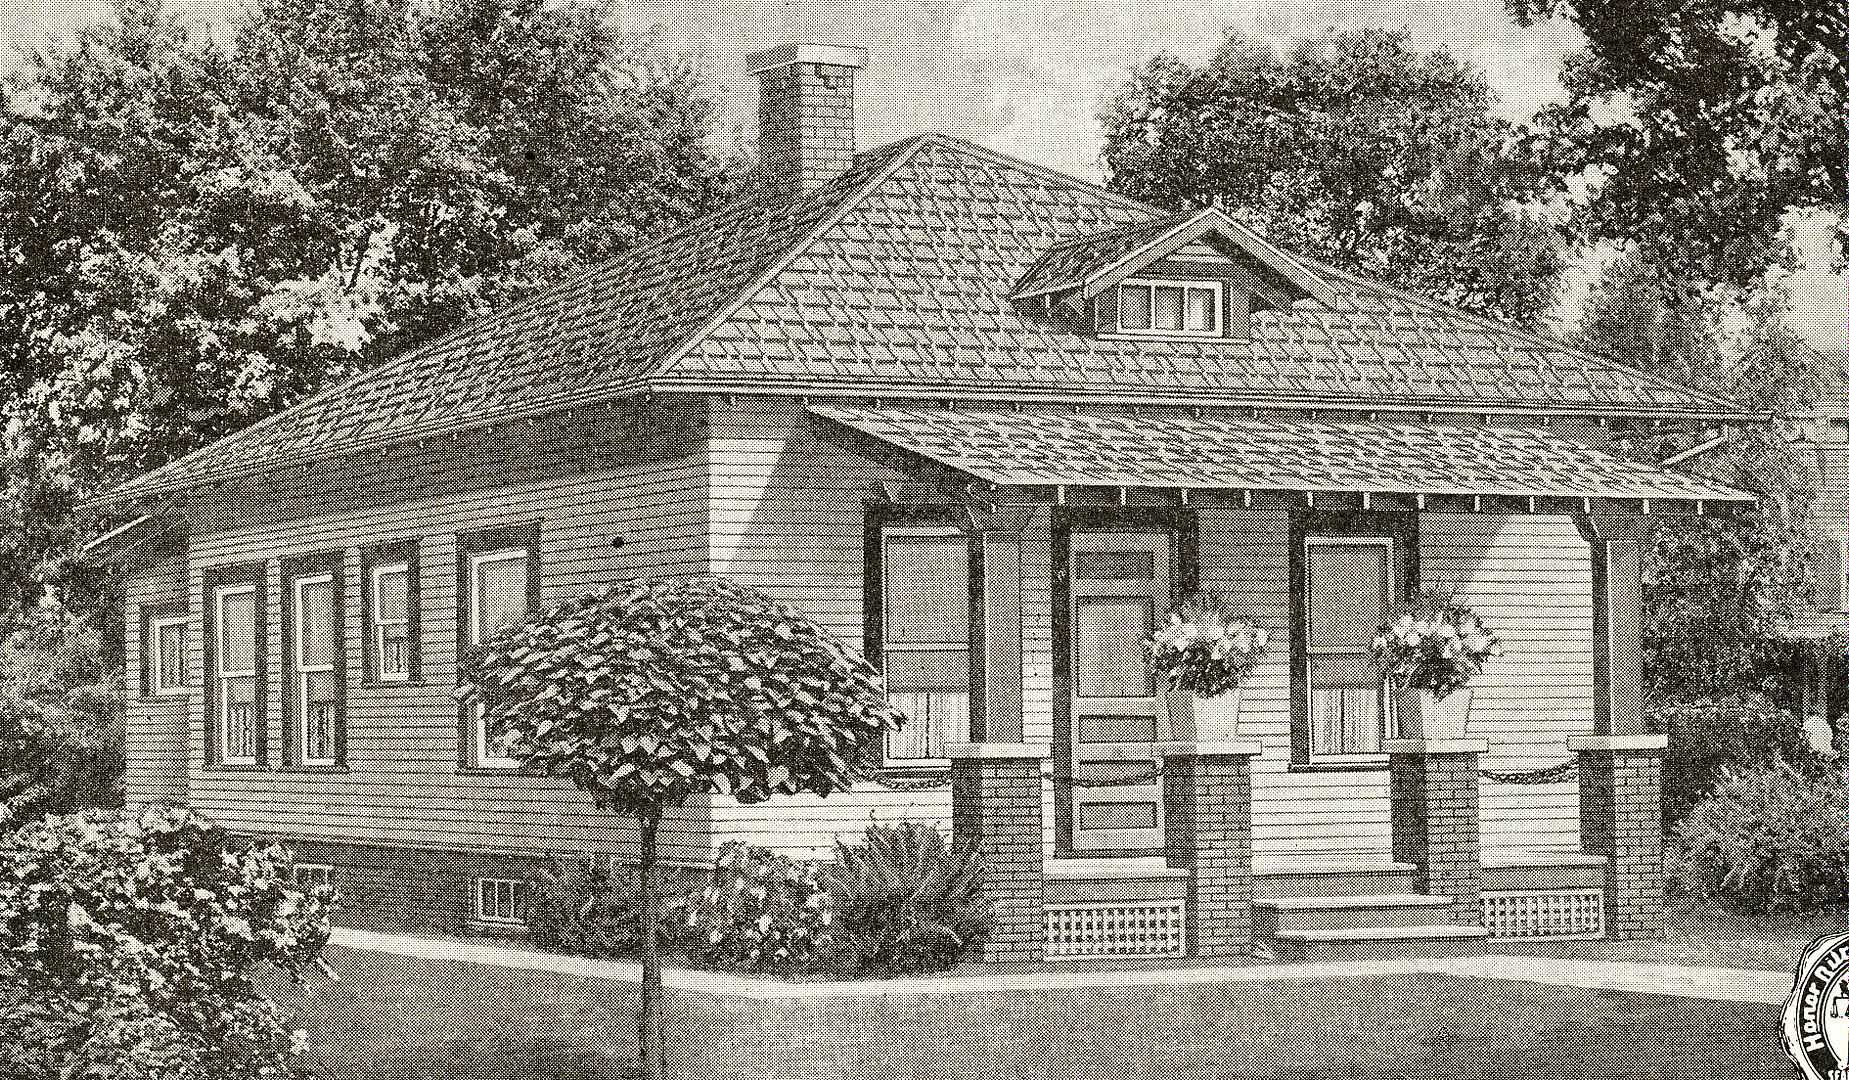 The Rest, like the Wayside was a very simple little house (1919).